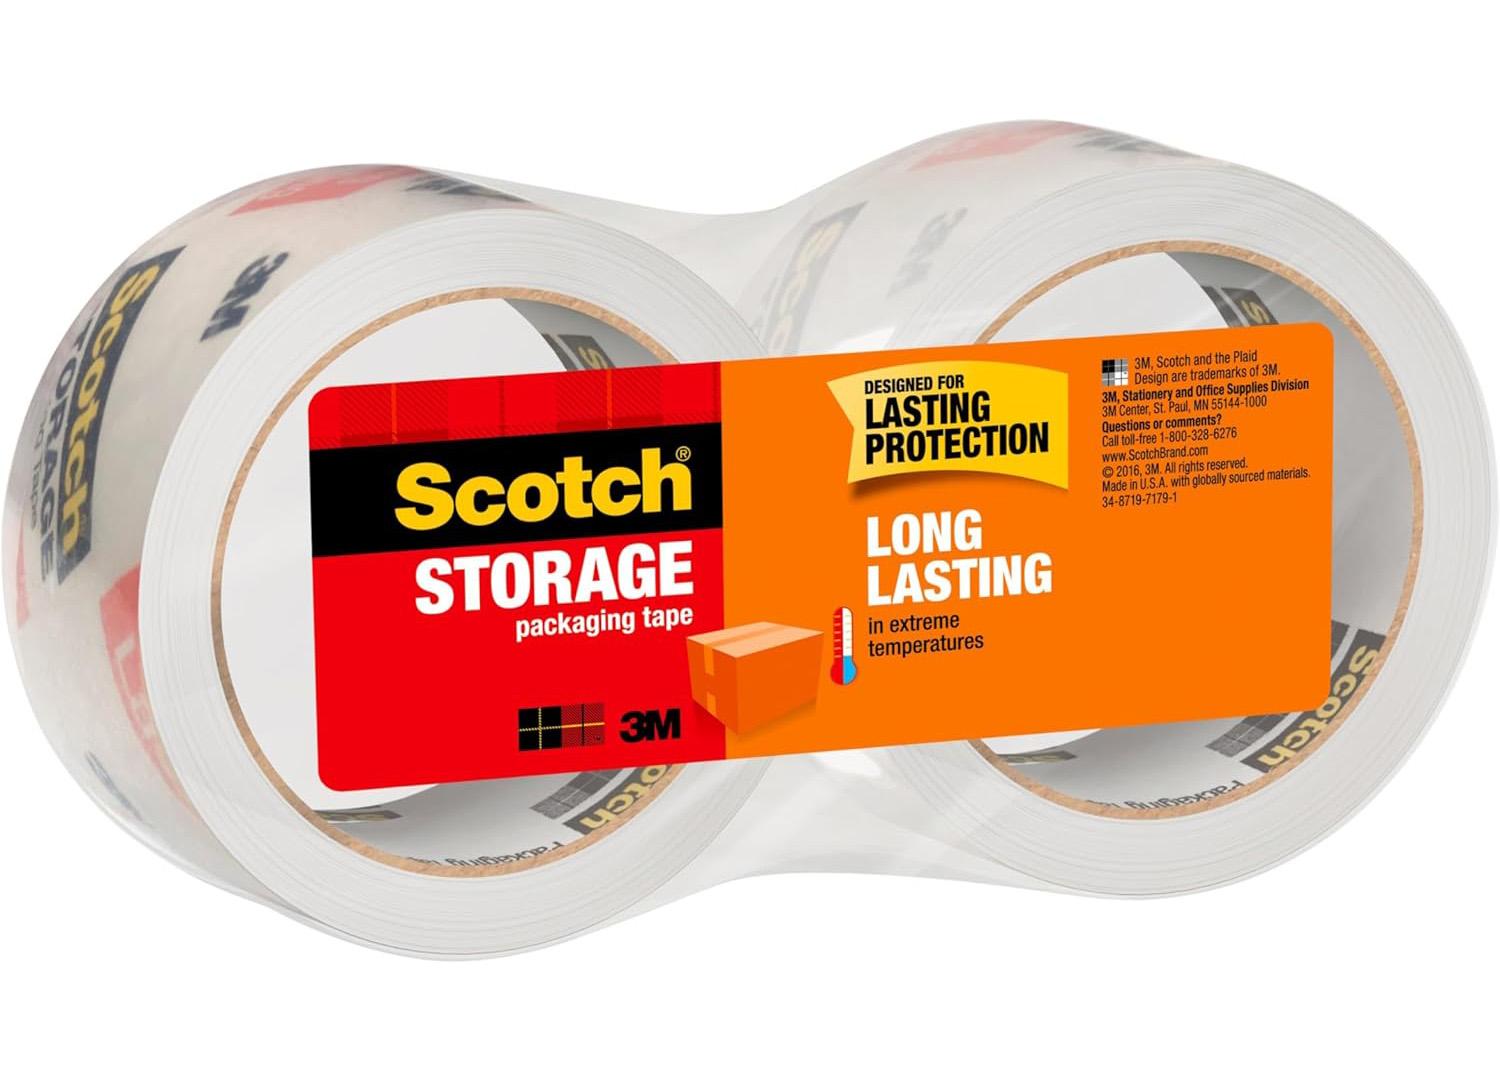 Scotch Long Lasting Strong Storage Packaging Tape 2 Pack for $3.33